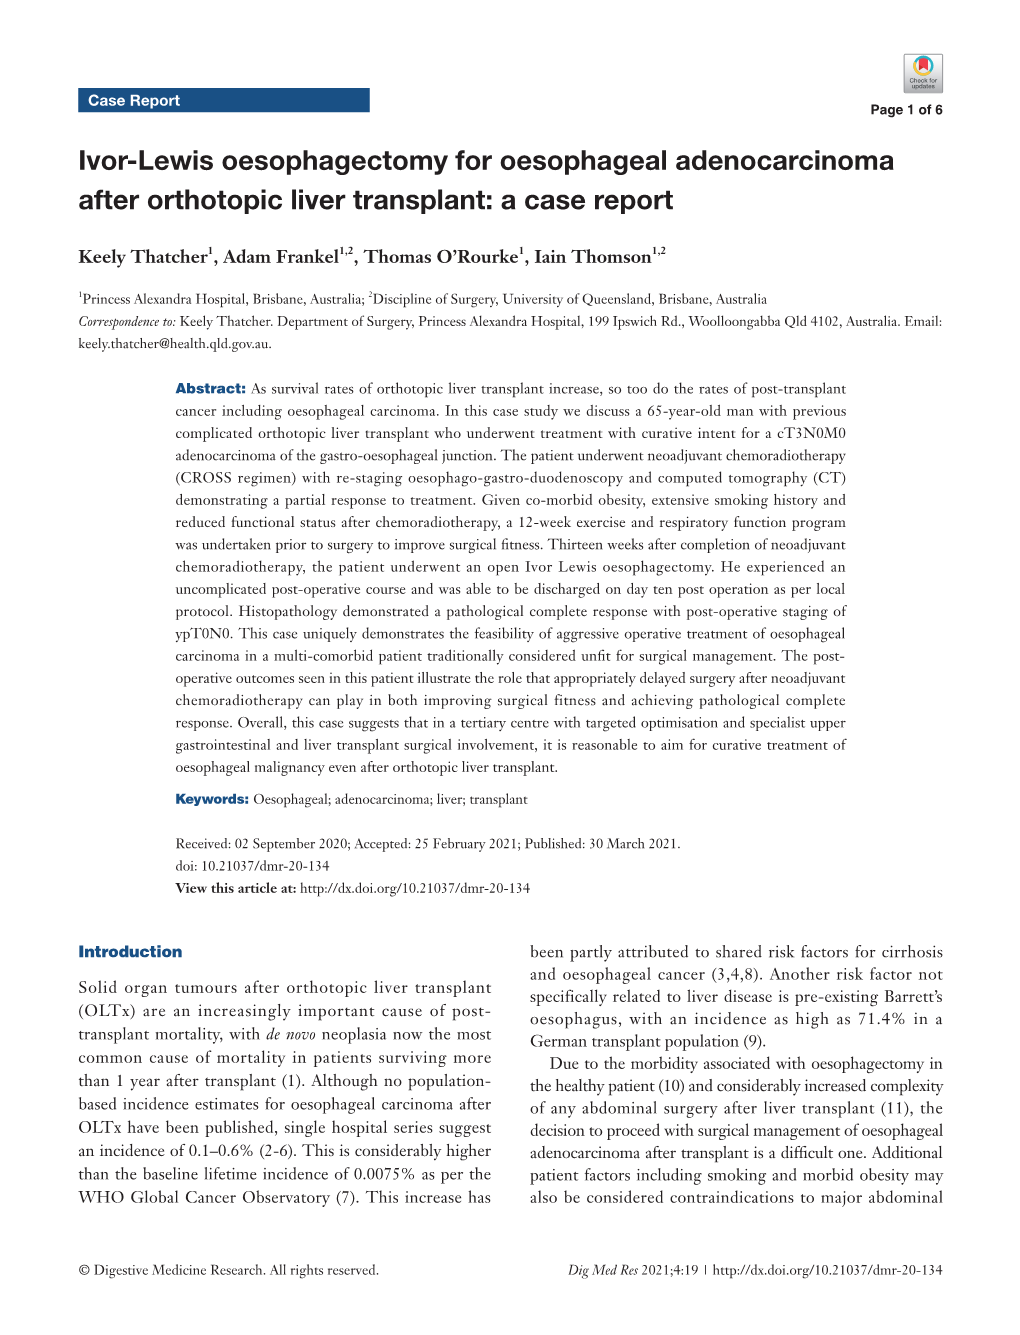 Ivor-Lewis Oesophagectomy for Oesophageal Adenocarcinoma After Orthotopic Liver Transplant: a Case Report